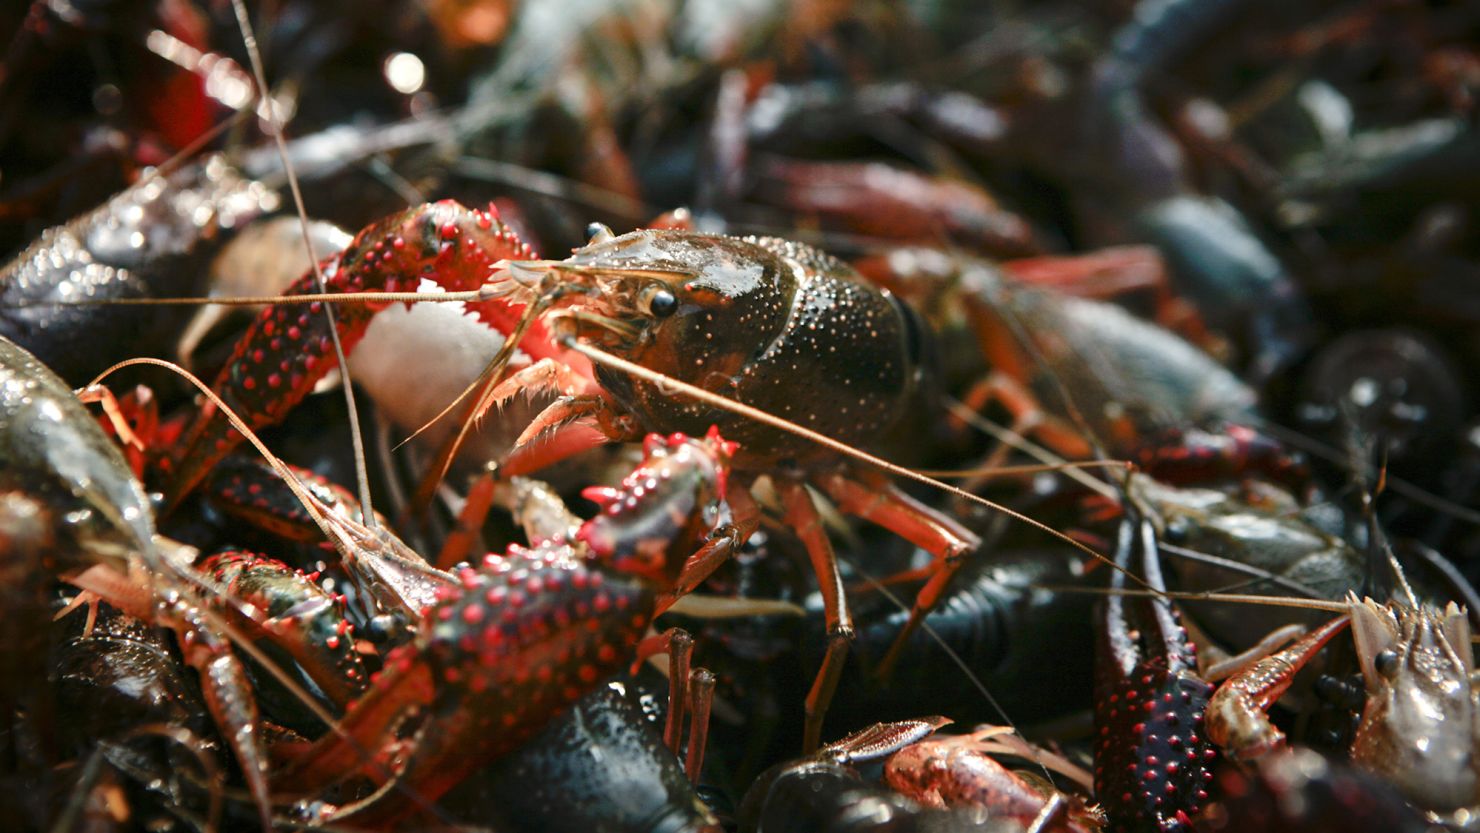 Drought and salt-water intrusion struck a significant blow to Louisiana's crawfish industry this year.